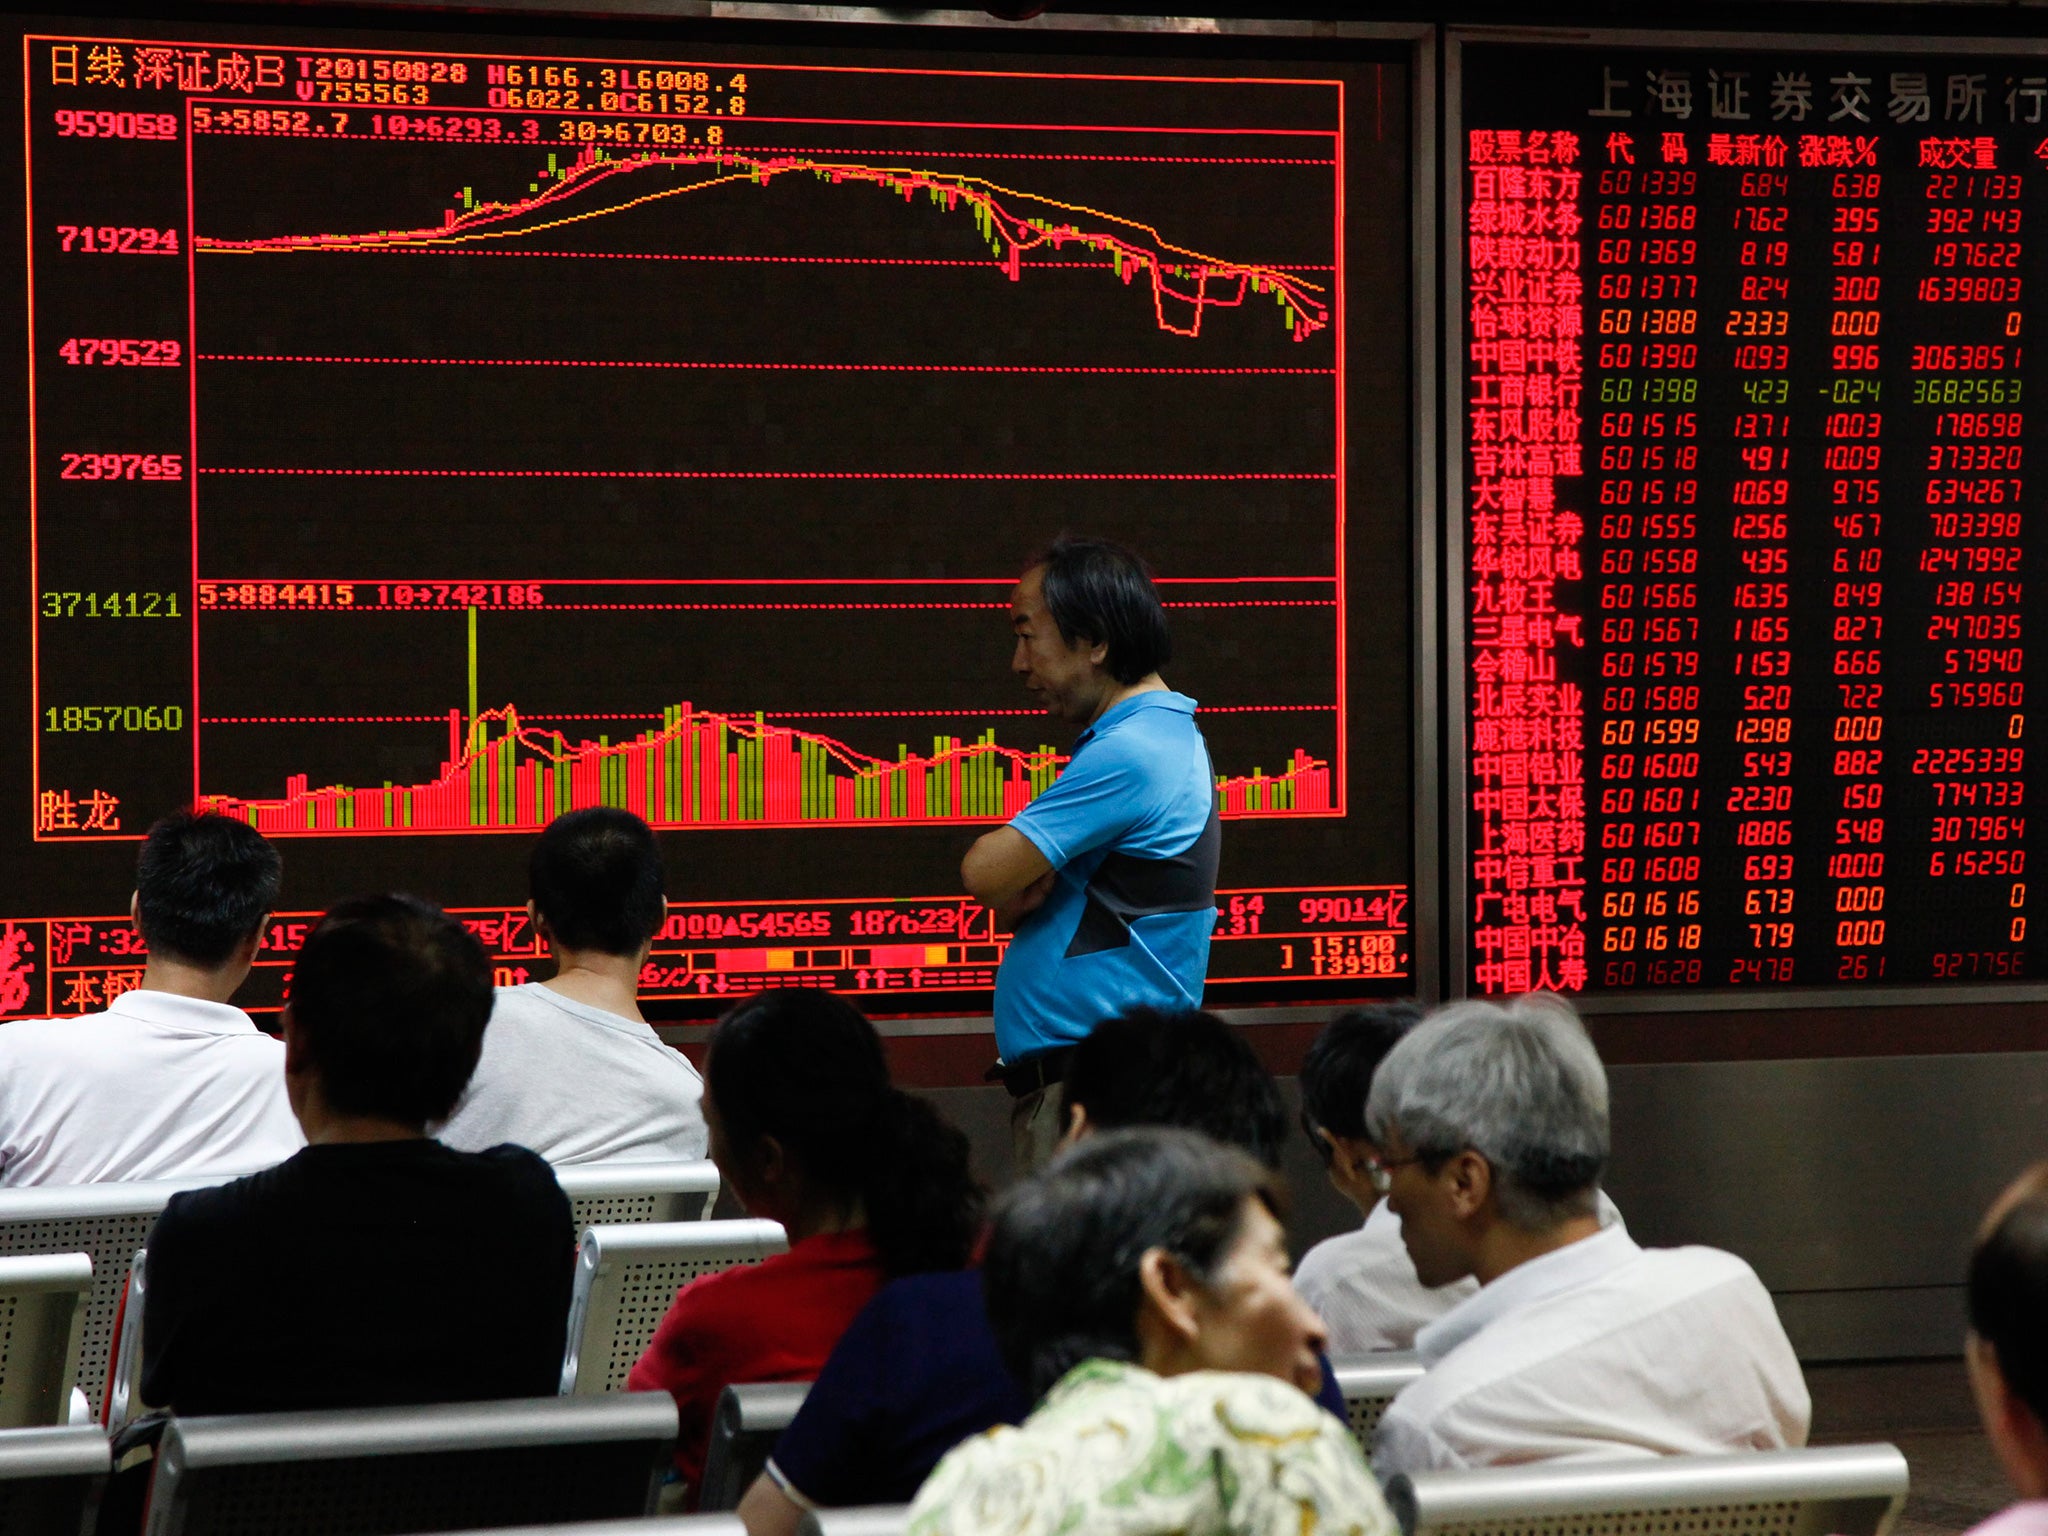 Investors monitor stock market data at a securities brokerage house in Beijing, China, 28 August 2015